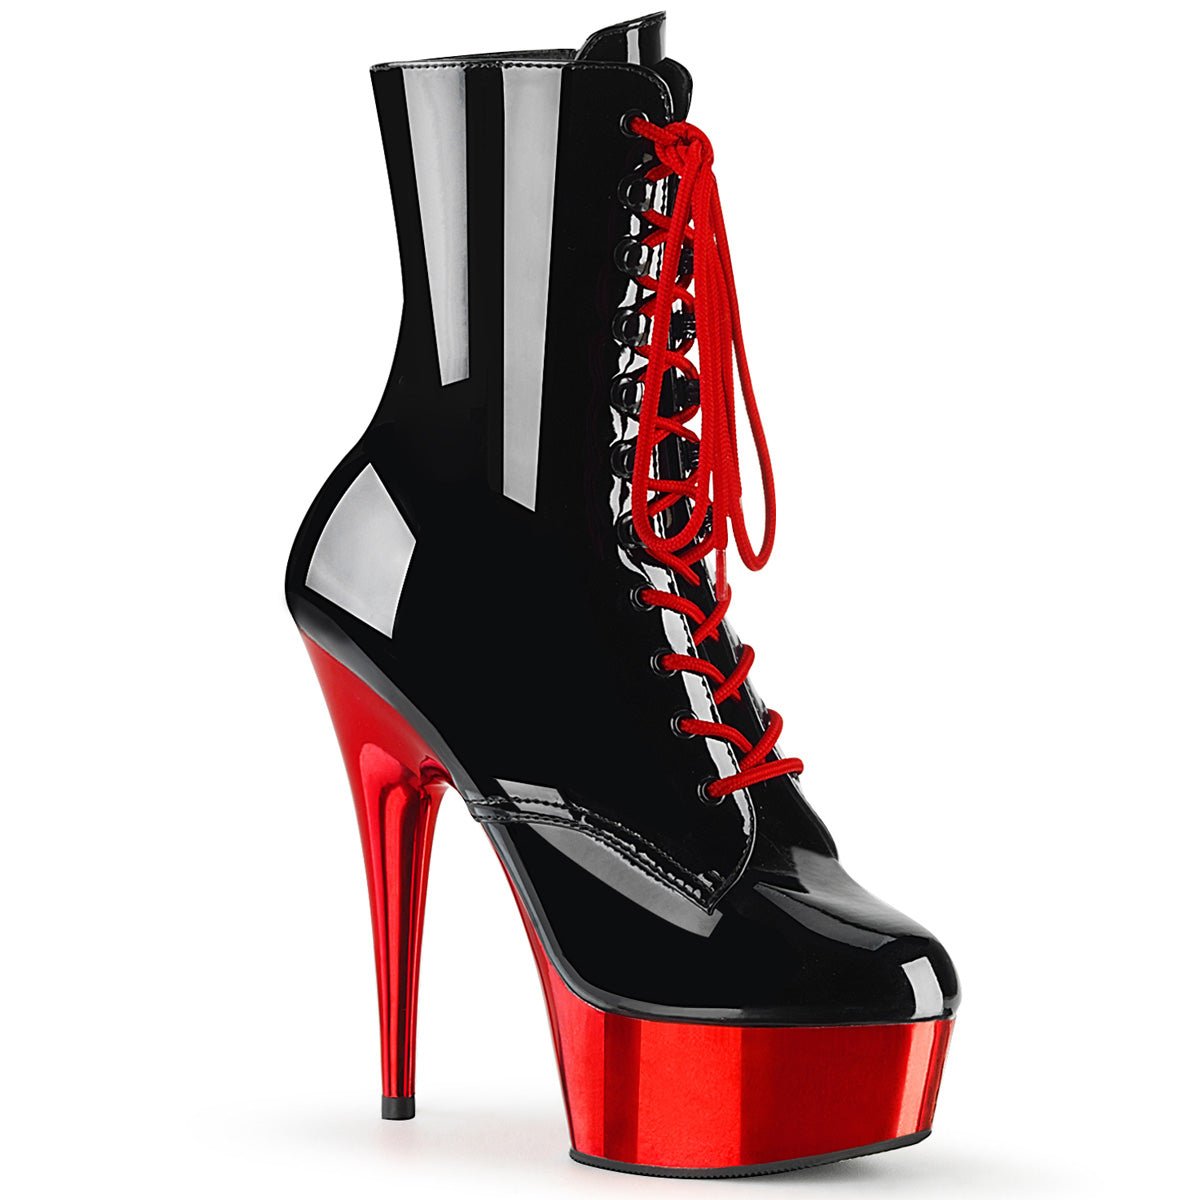 Pleaser DELIGHT 1020 Platform Boots,Front Lace Boots - From Pleaser Sold By Alternative Footwear